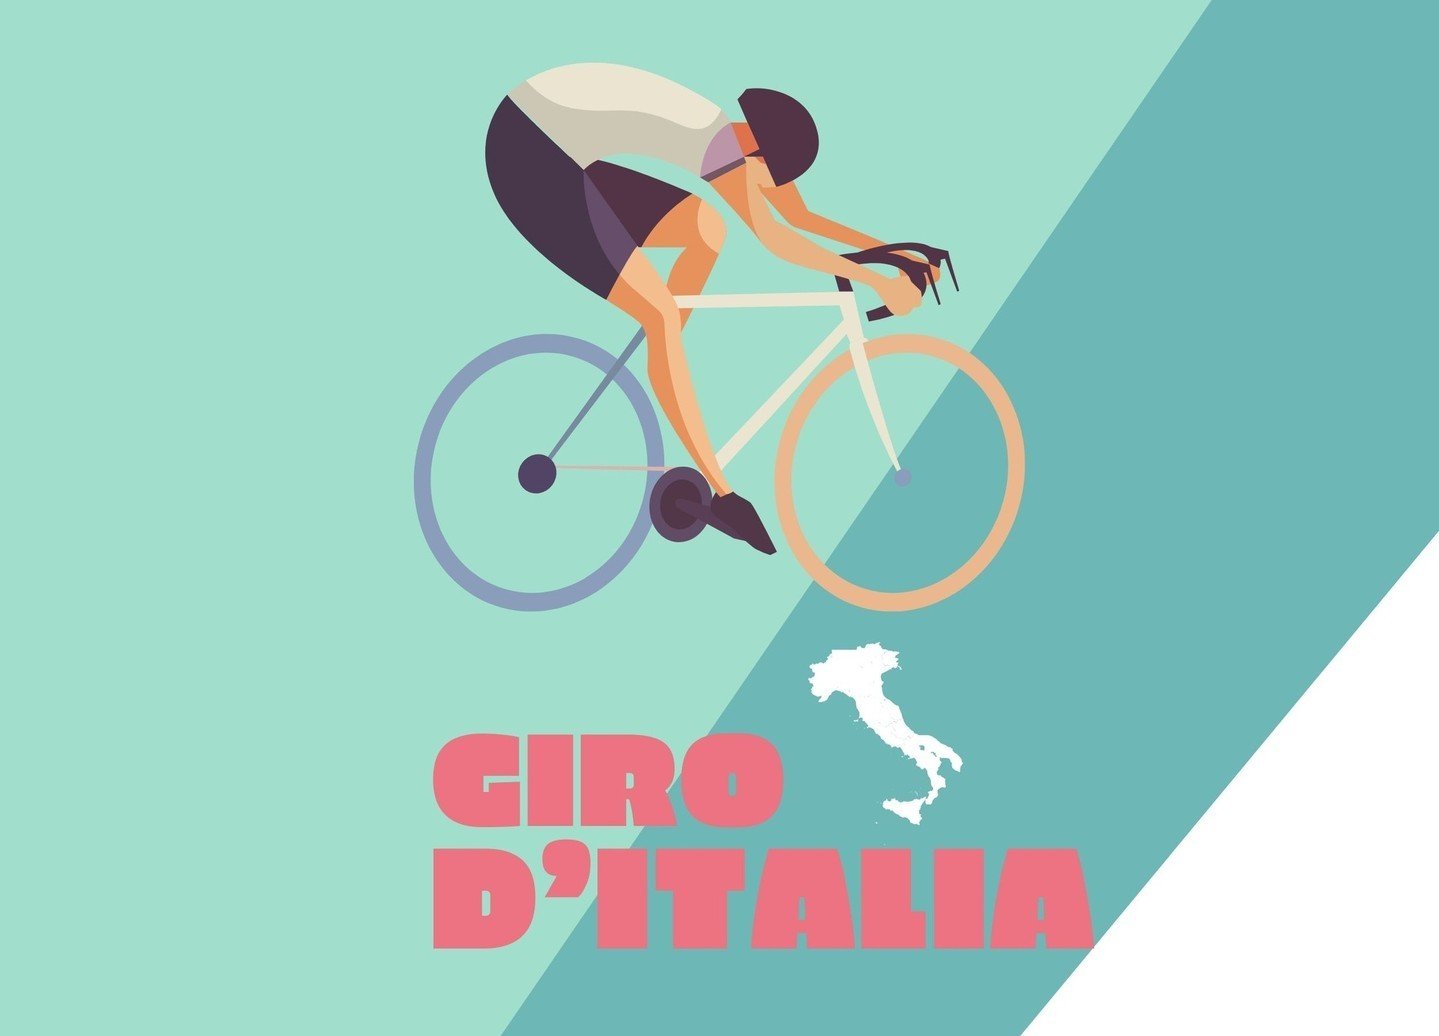 A few seats left, In the spirit of the annual Italian bike race, join us for a trip around Italy on May 23. ⁠
⁠
For the first part of the evening, we will have a tasting of 8 exquisite wines from classic Italian regions, showcasing unique grapes and 